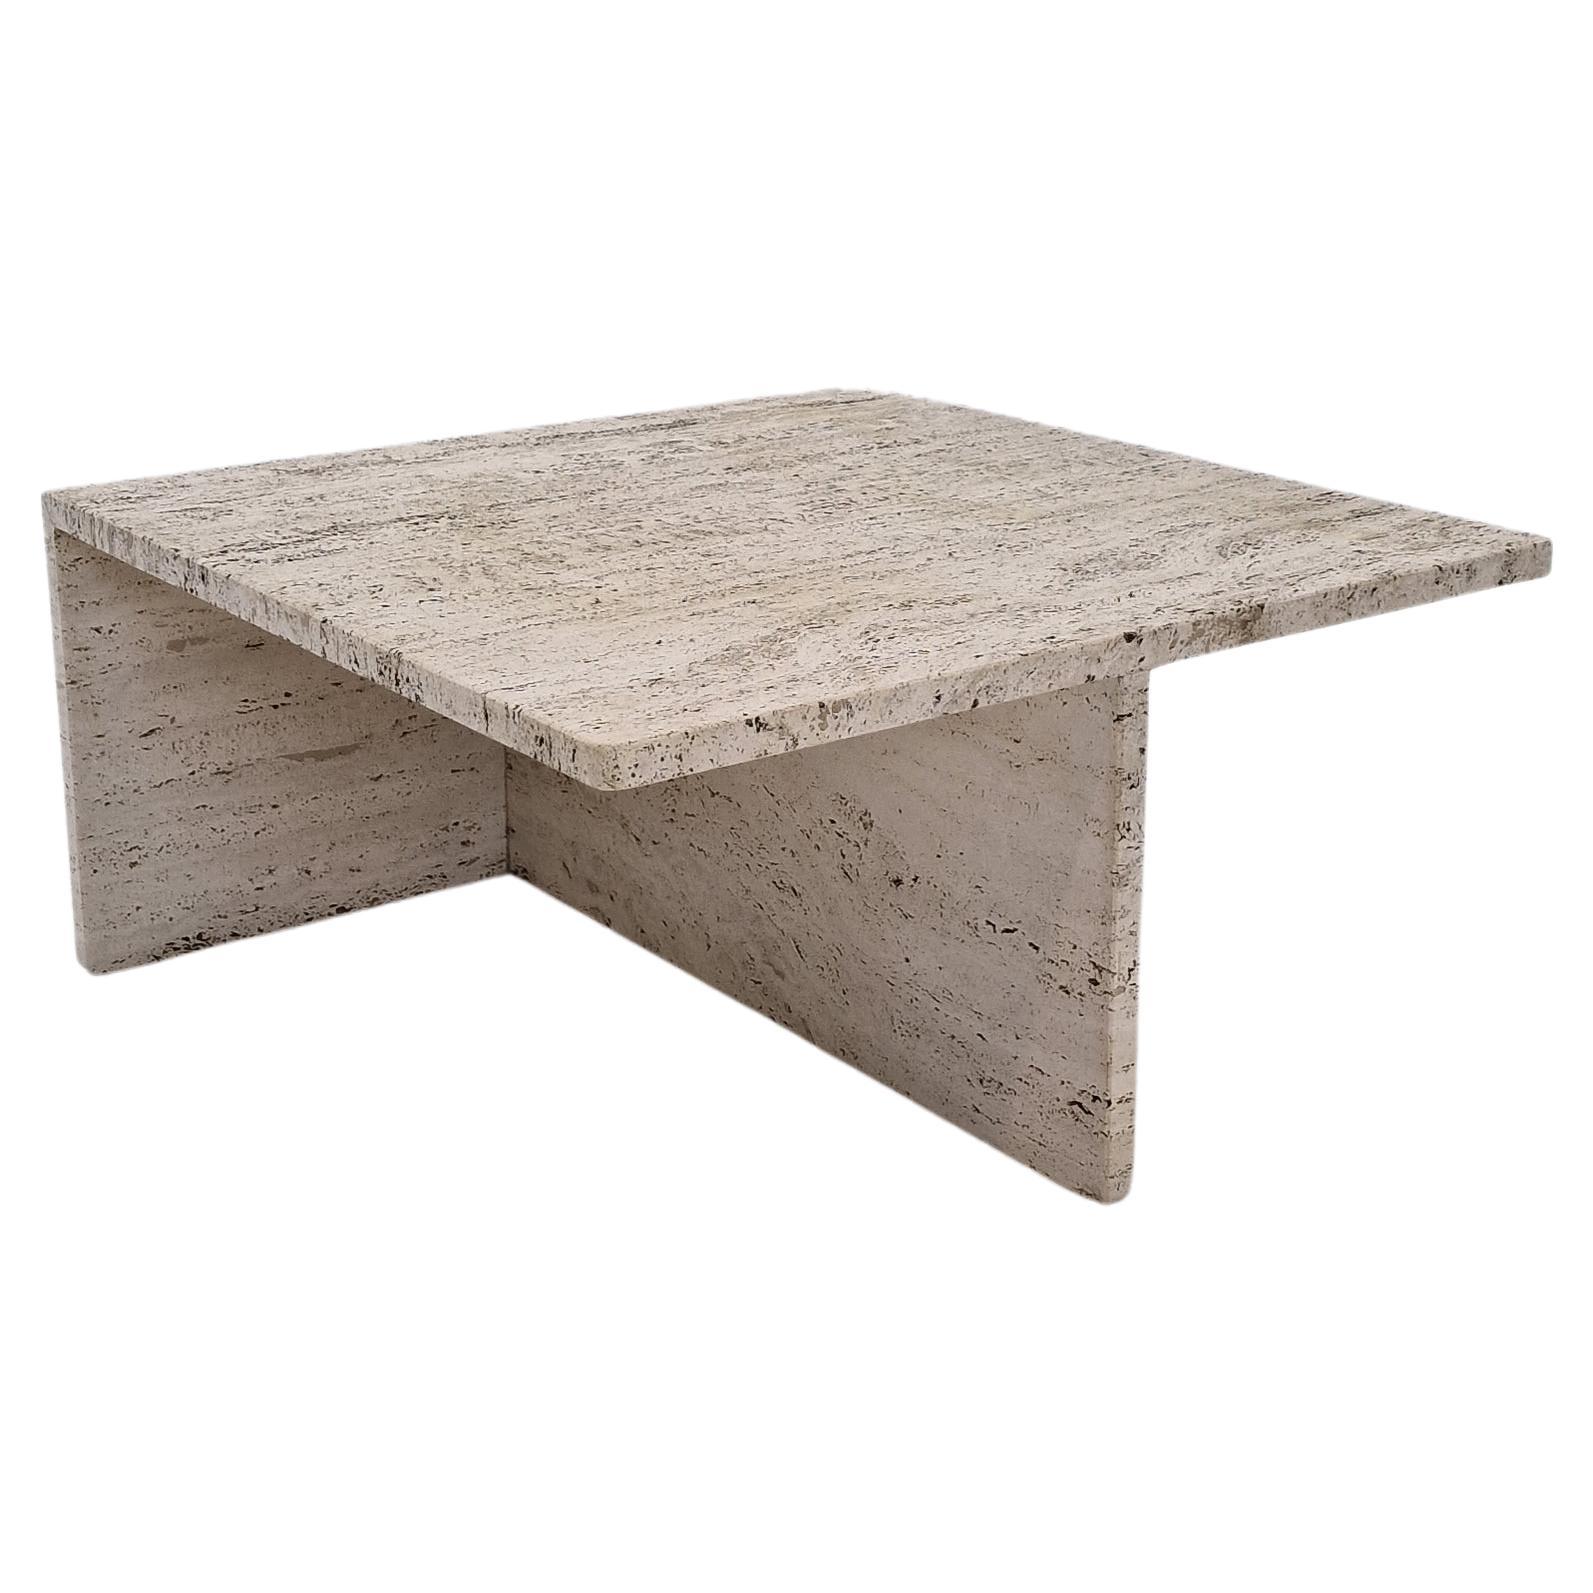 Square Travertine Coffee Table by Up & Up Italy, 1970s For Sale